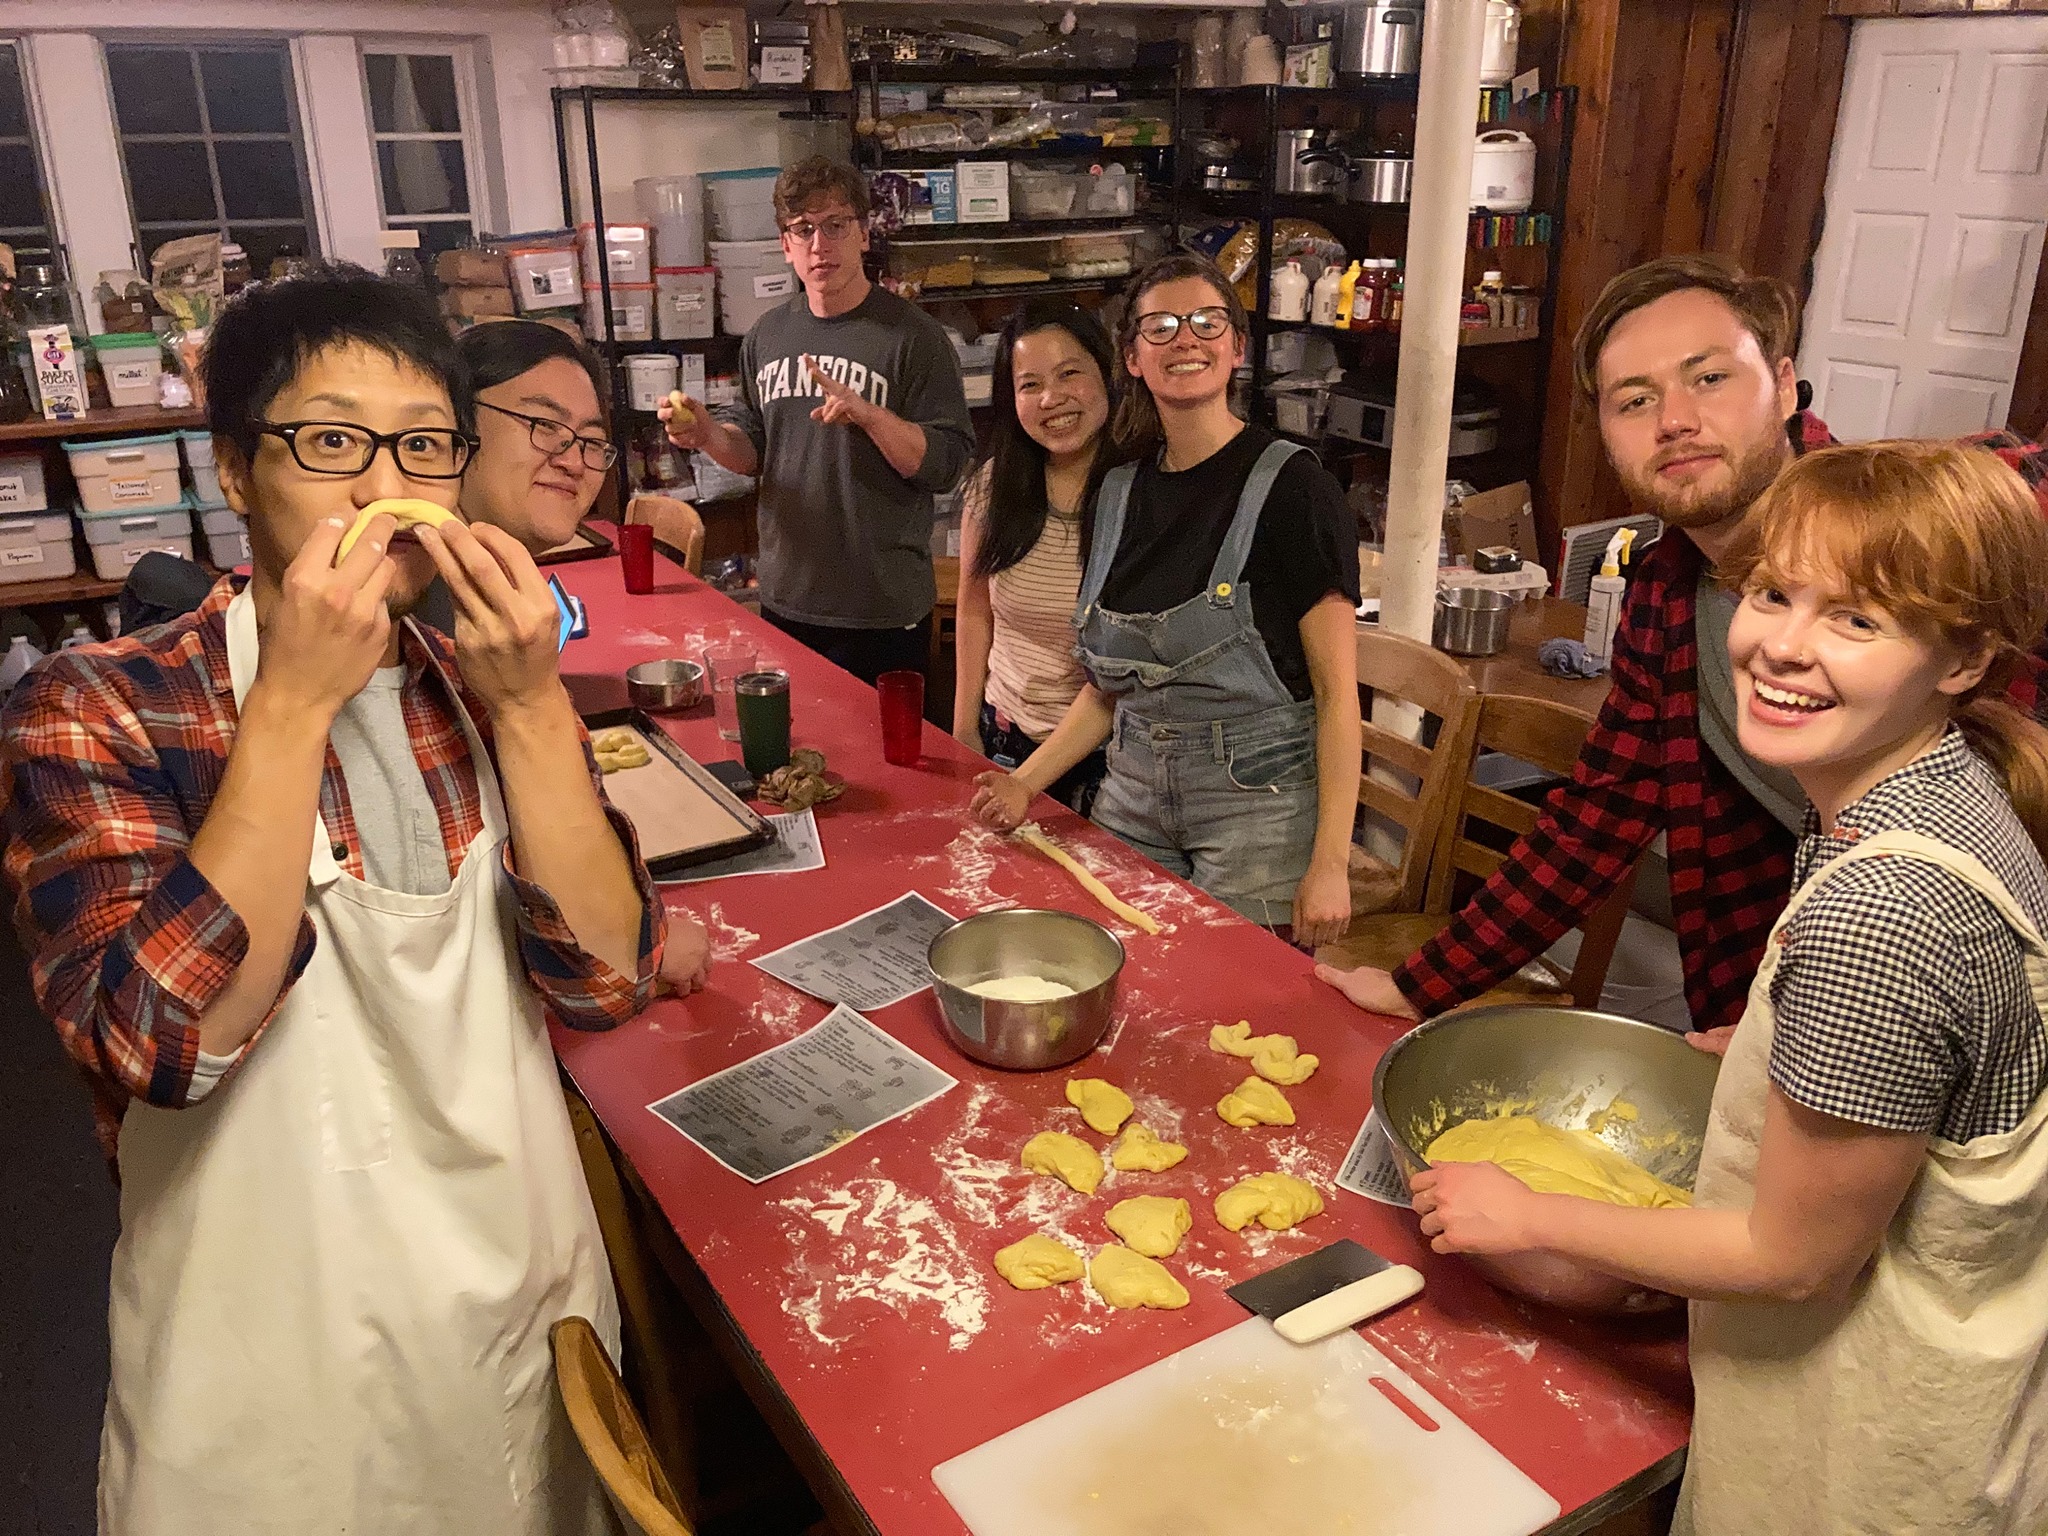 Summiteers make Santa Lucia Buns in the dining room. (Circa winter 2020)